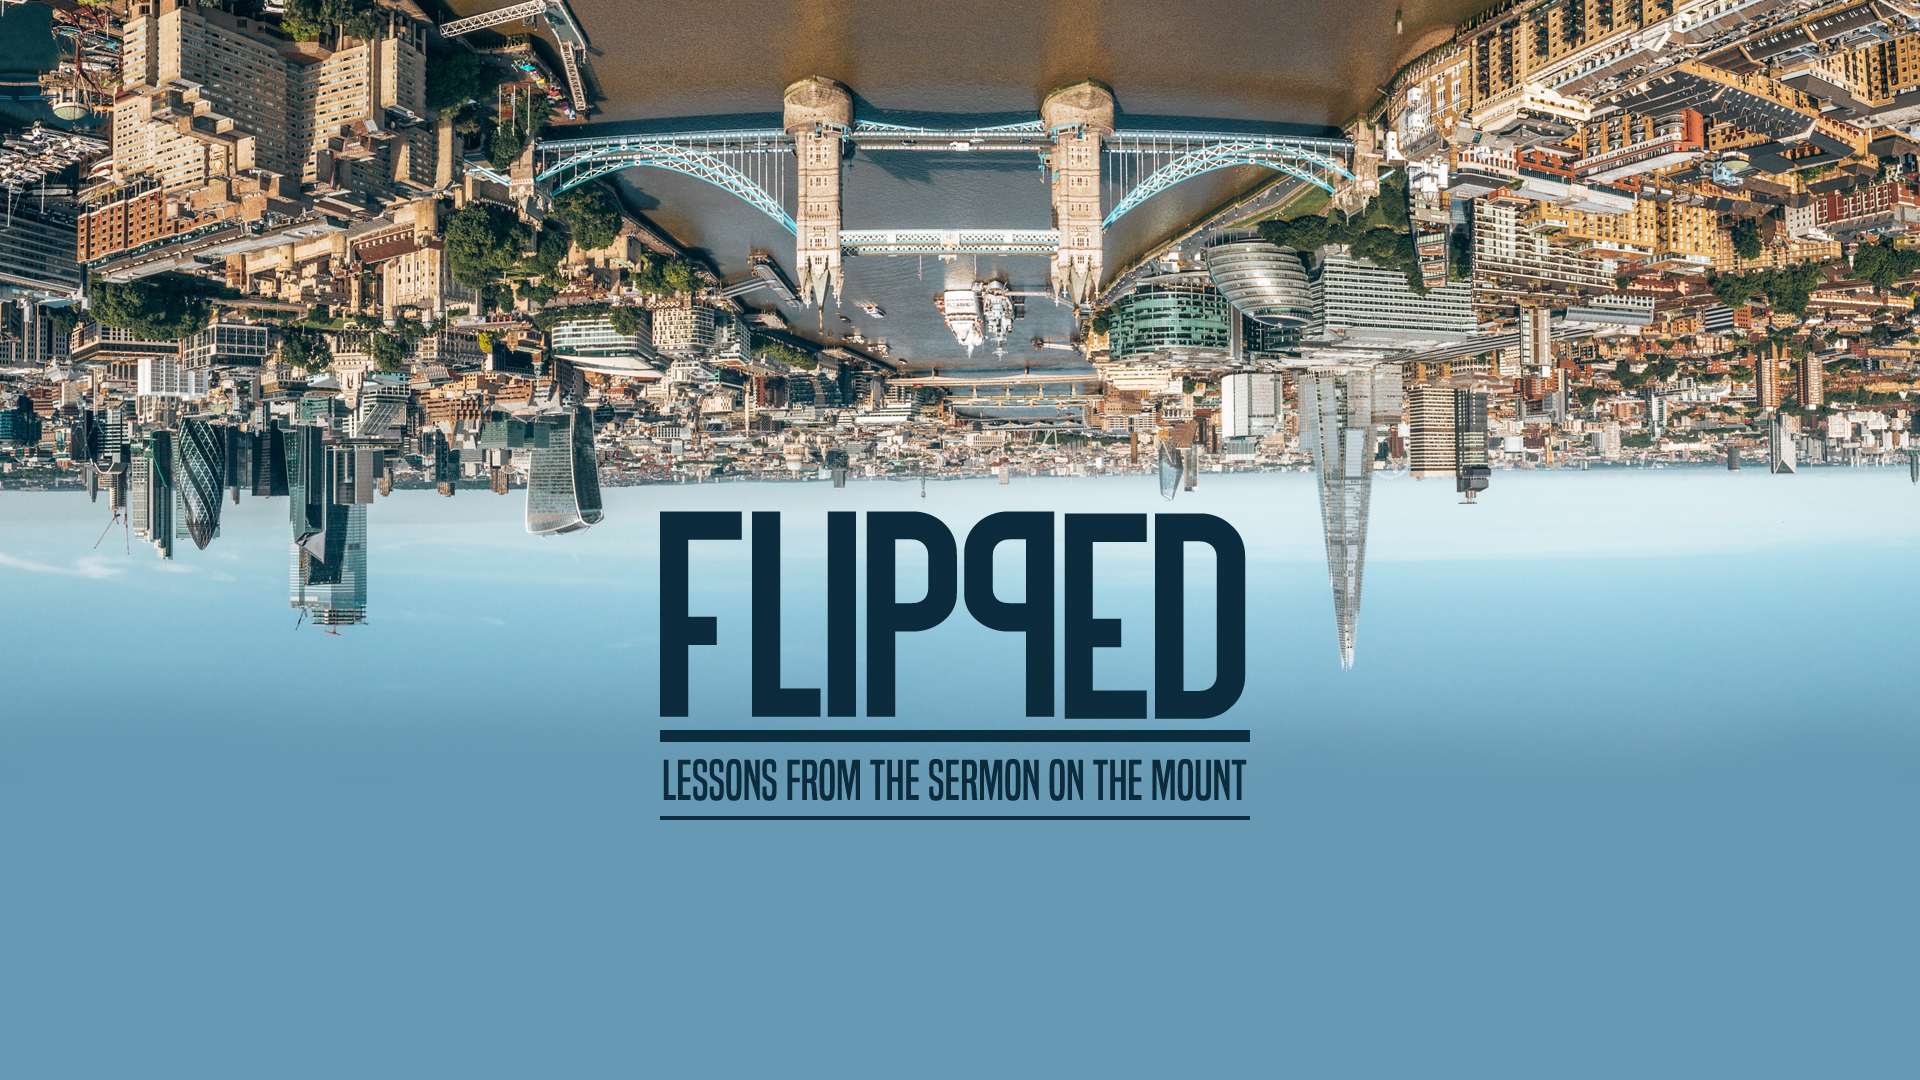 Flipped (p8) – Relationships are what Matter